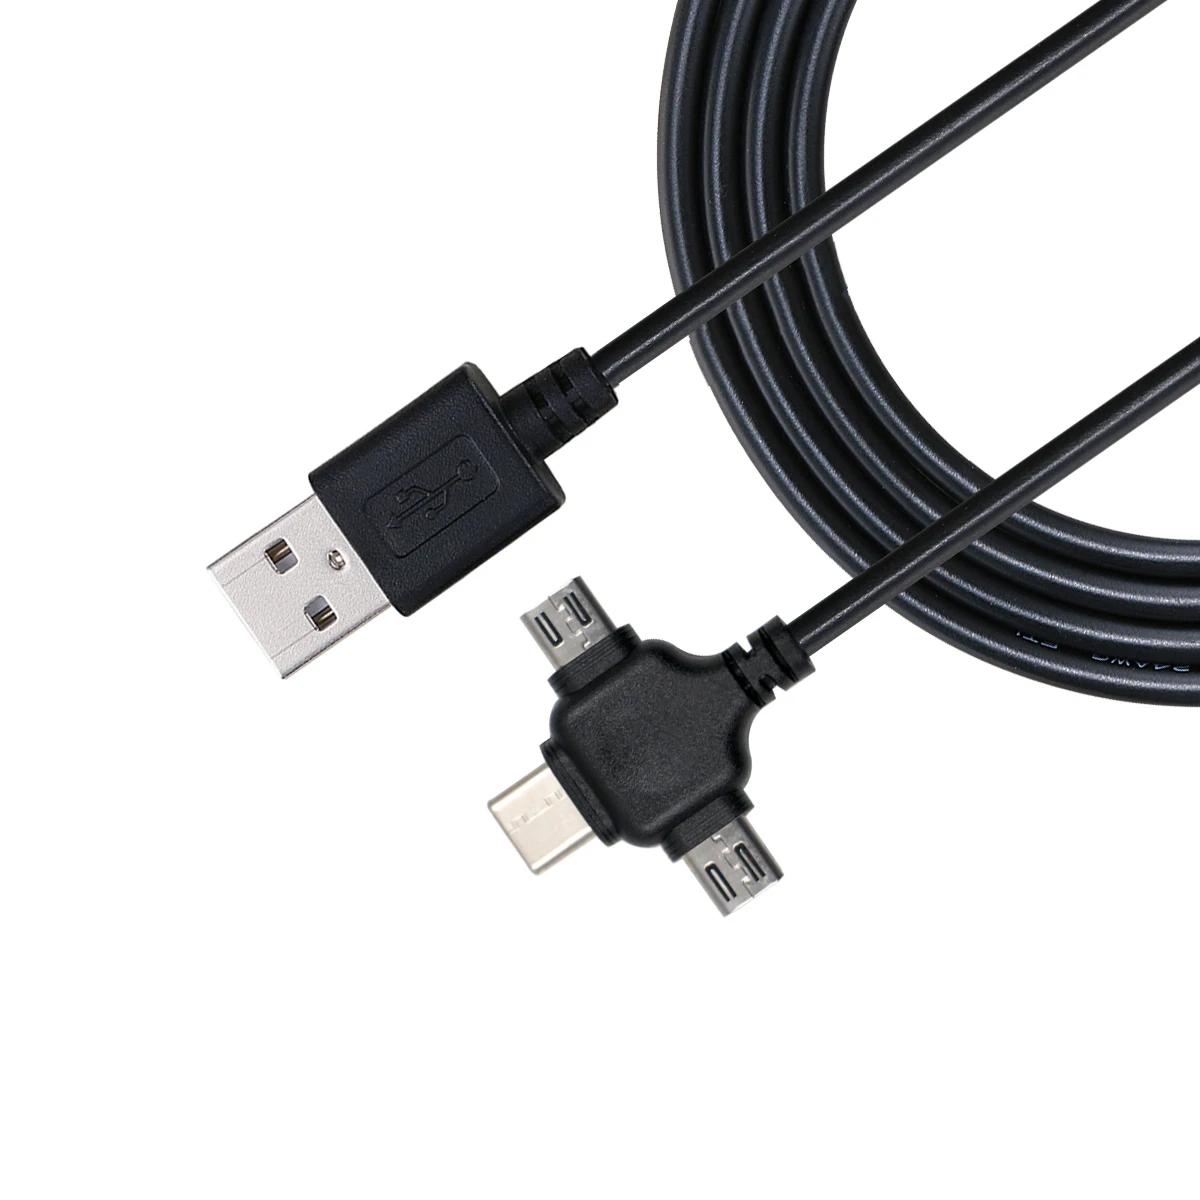 Charger Cable USB 3.0 3.1 USB A Male to Type C Cable Fast Charger wire for mobile phone notebook 21